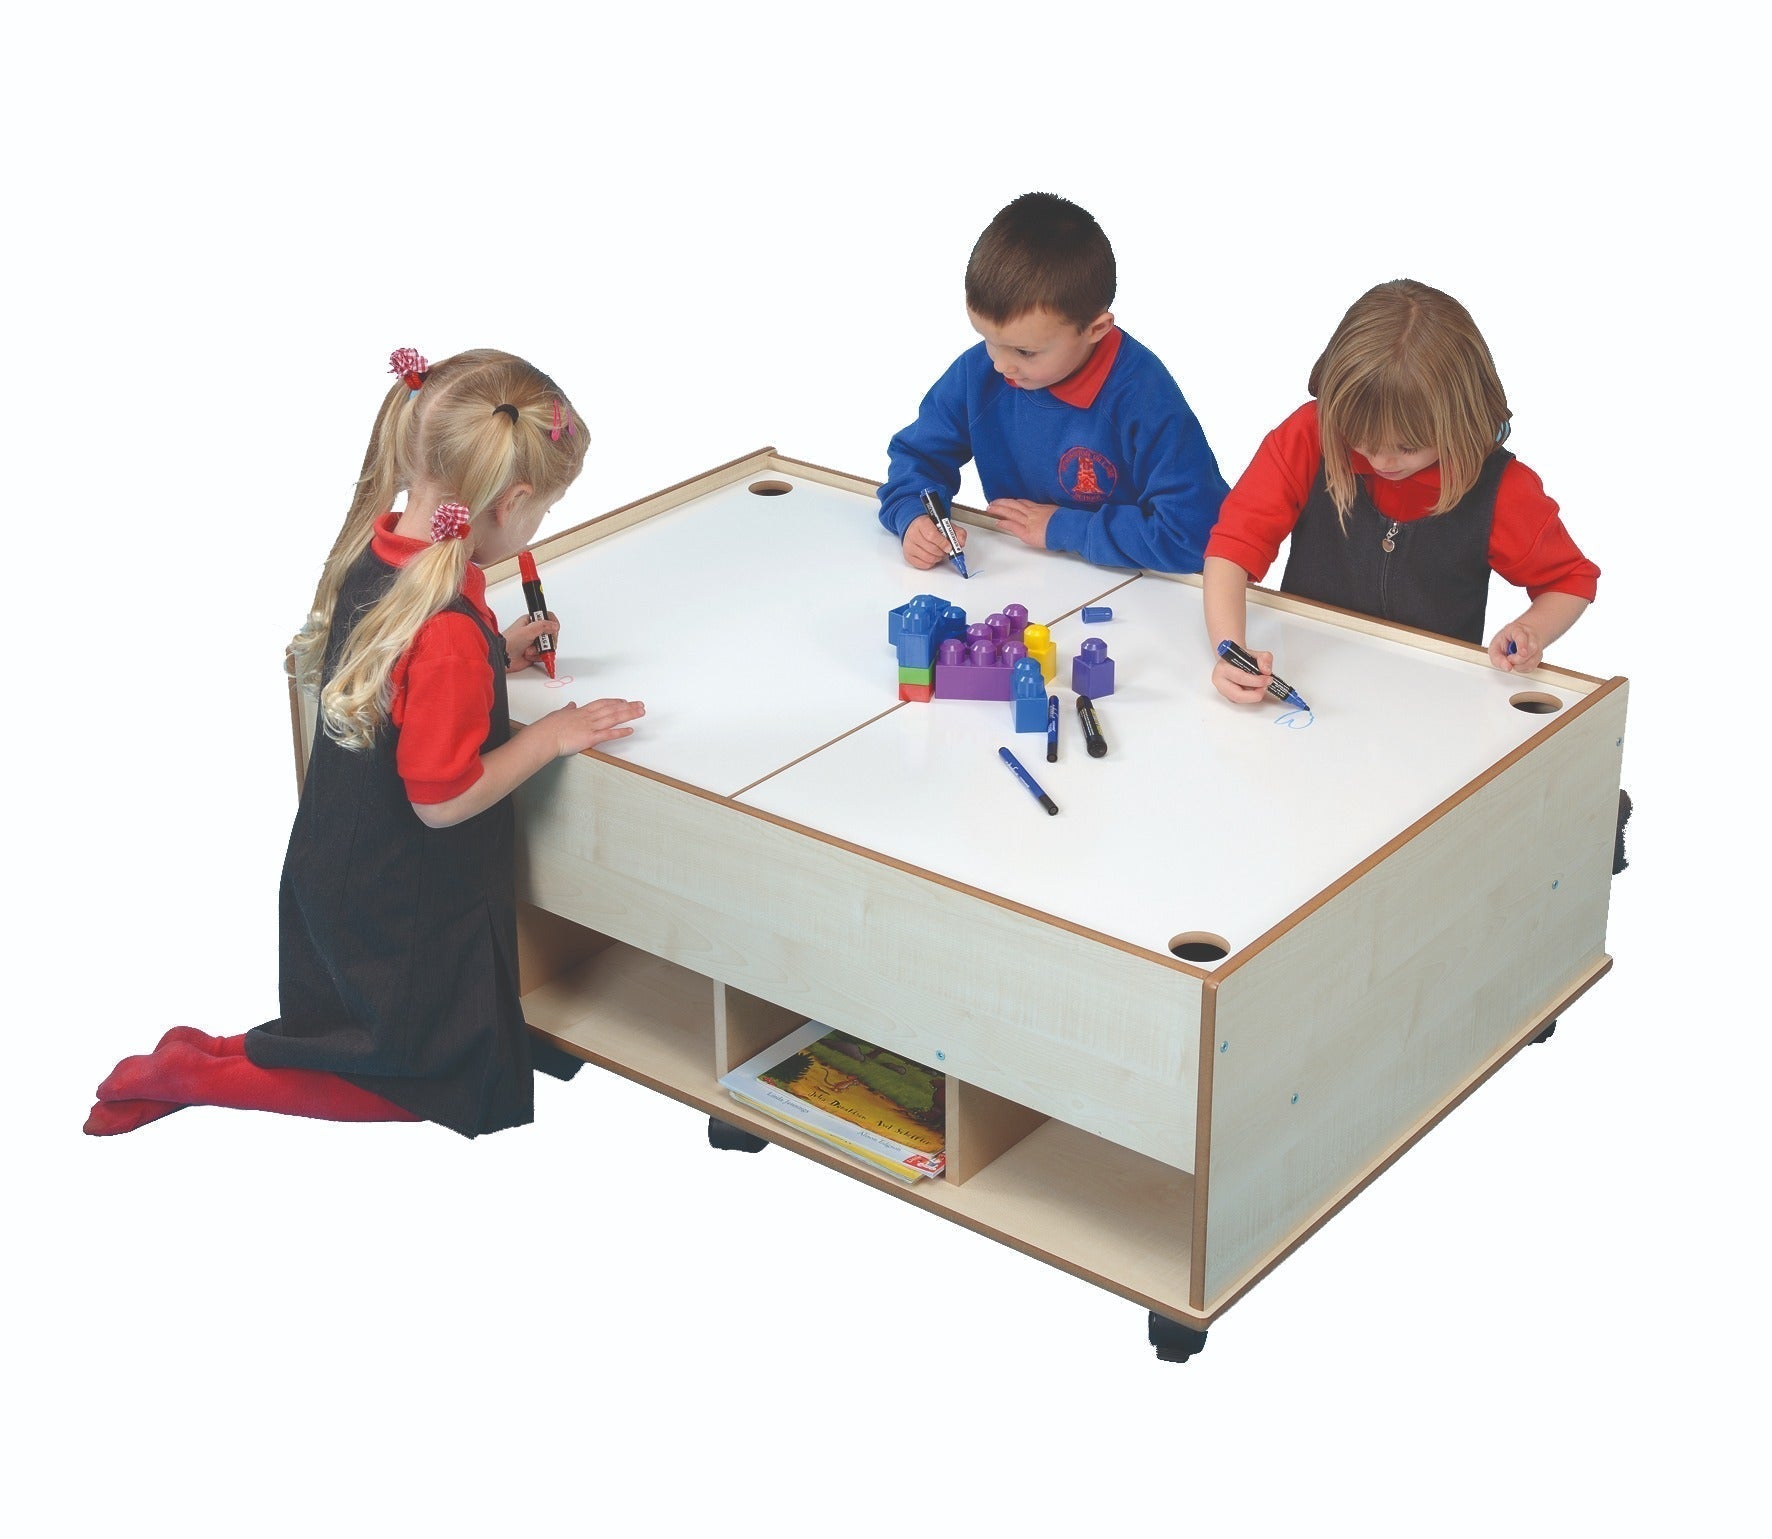 Chalkboard & Dry wipe Table, The Chalkboard and Dry wipe Storage Table is the perfect addition to any classroom or home learning environment. With its locking castors, it easily moves from one space to another, making it a versatile learning tool.Designed for children to engage in mark making, the Chalkboard & Dry wipe Table is the perfect height for them to comfortably kneel or stand while they draw. The surface area is large enough for an individual or small group to play and learn together.The reversible